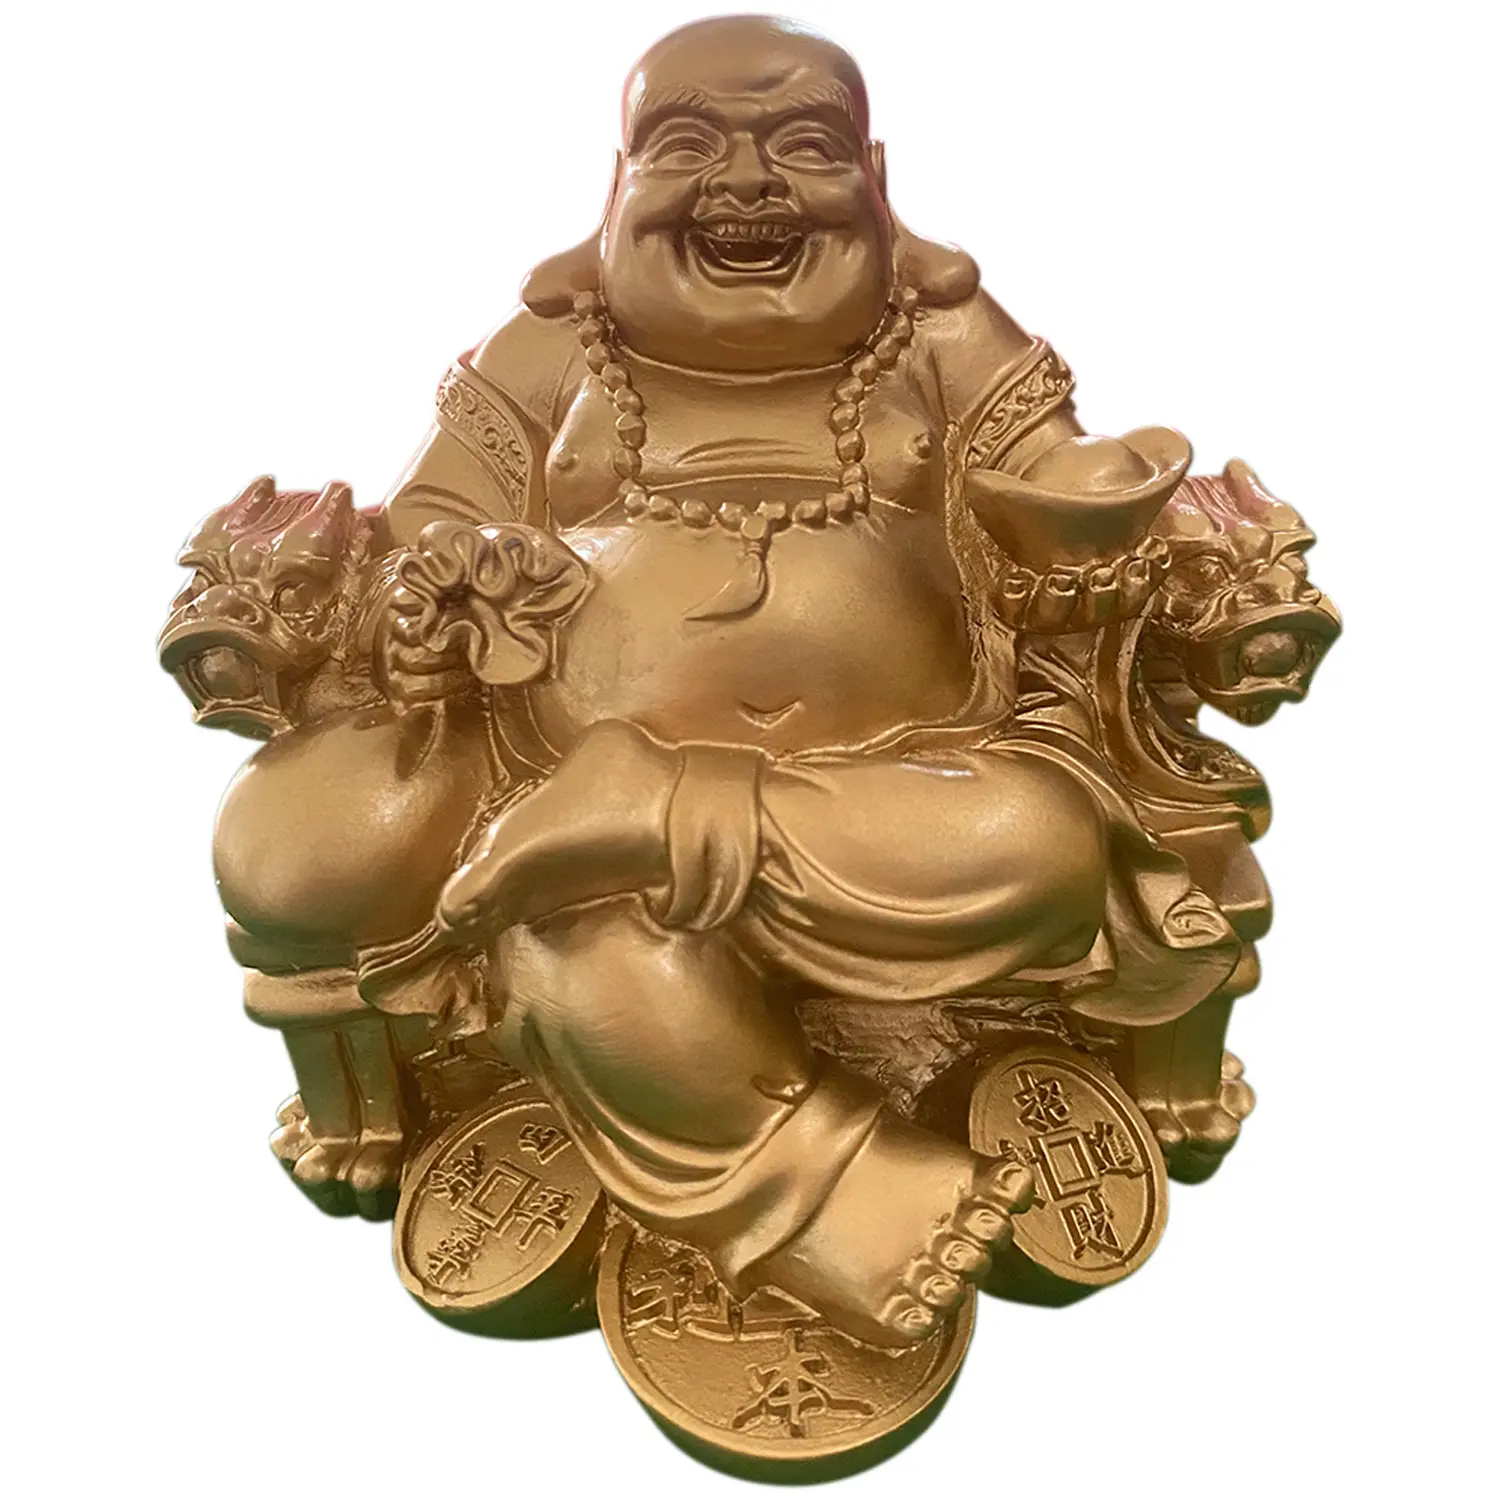 Chinese Handicrafts Resin Laughing Buddha Sitting on Dragon Chair Sculpture Fengshui Wealth Lucky Statue Home Decoration Gift